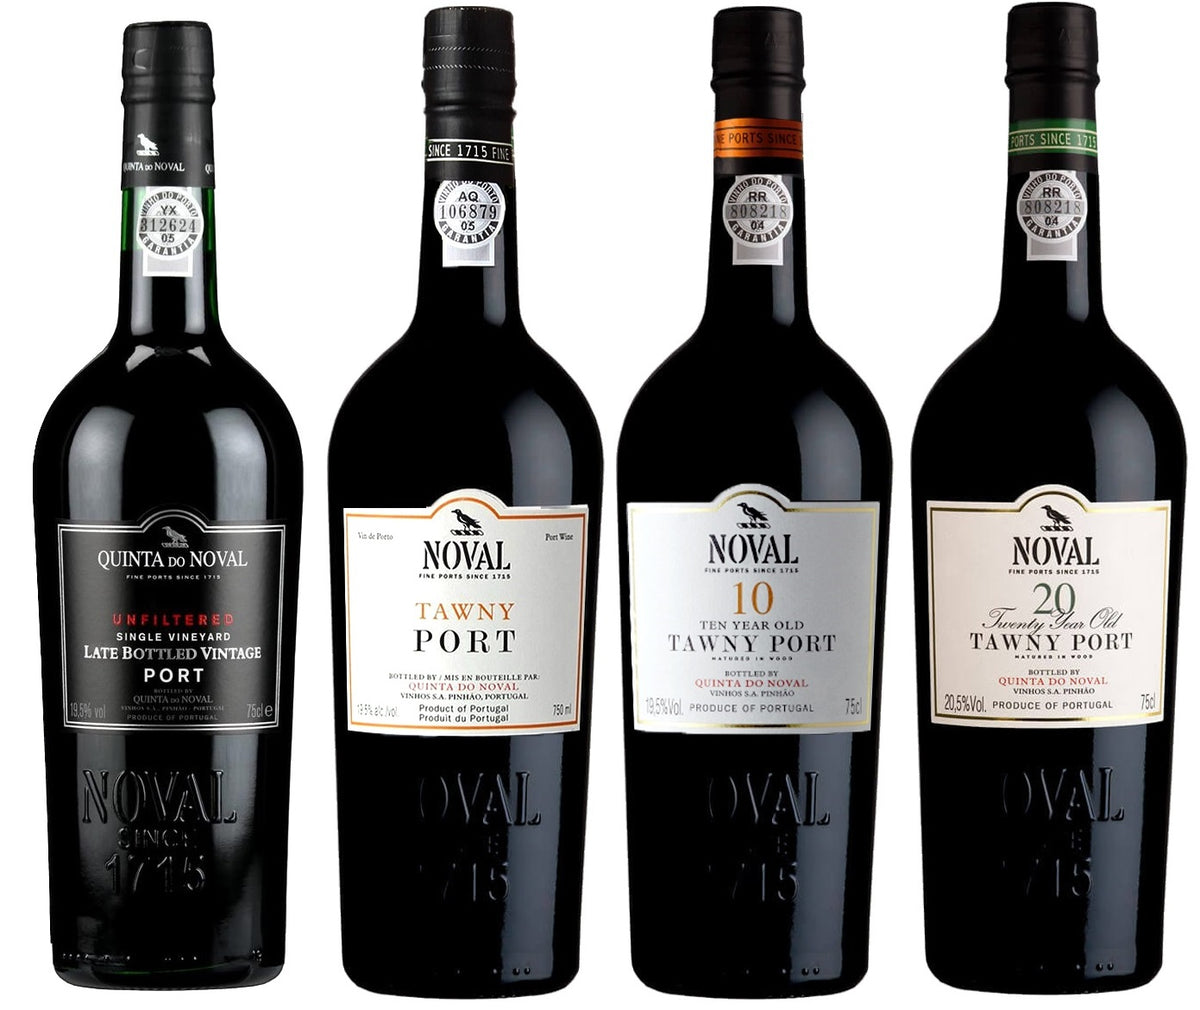 EVENT - MS Wine Club with Quinta do Noval Port Tasting